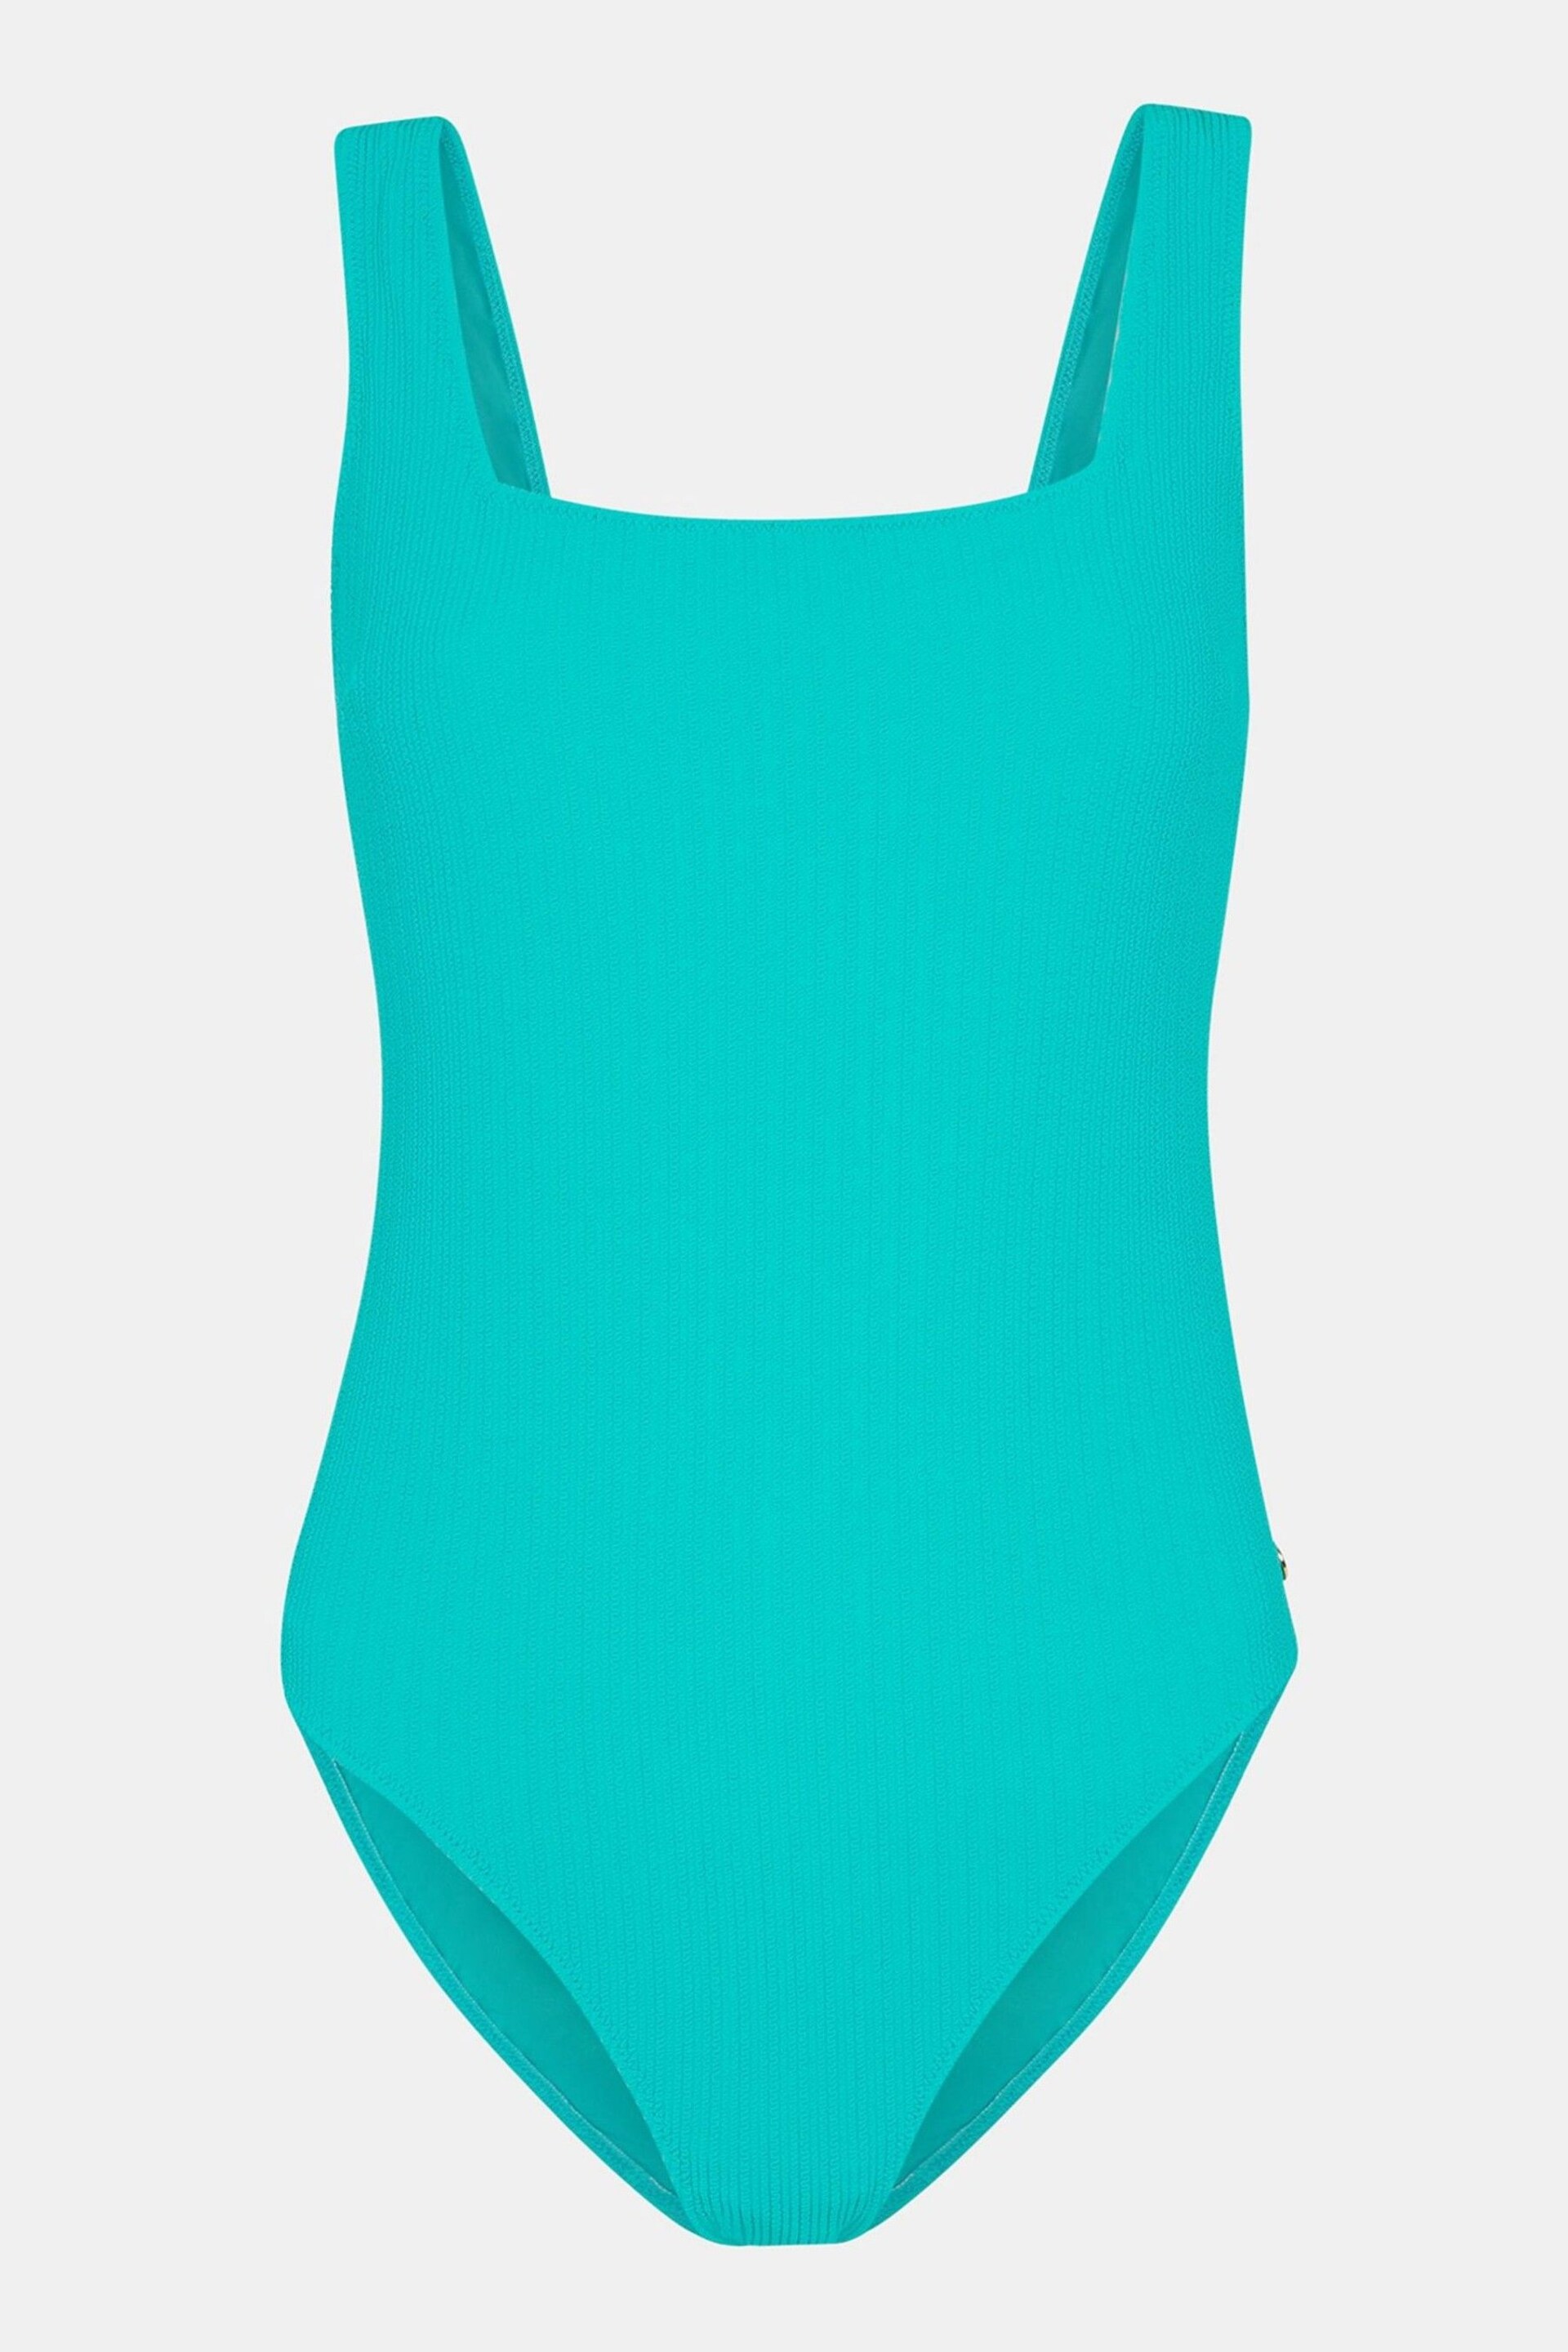 Whistles Blue Square Neck Swimsuit - Image 5 of 5